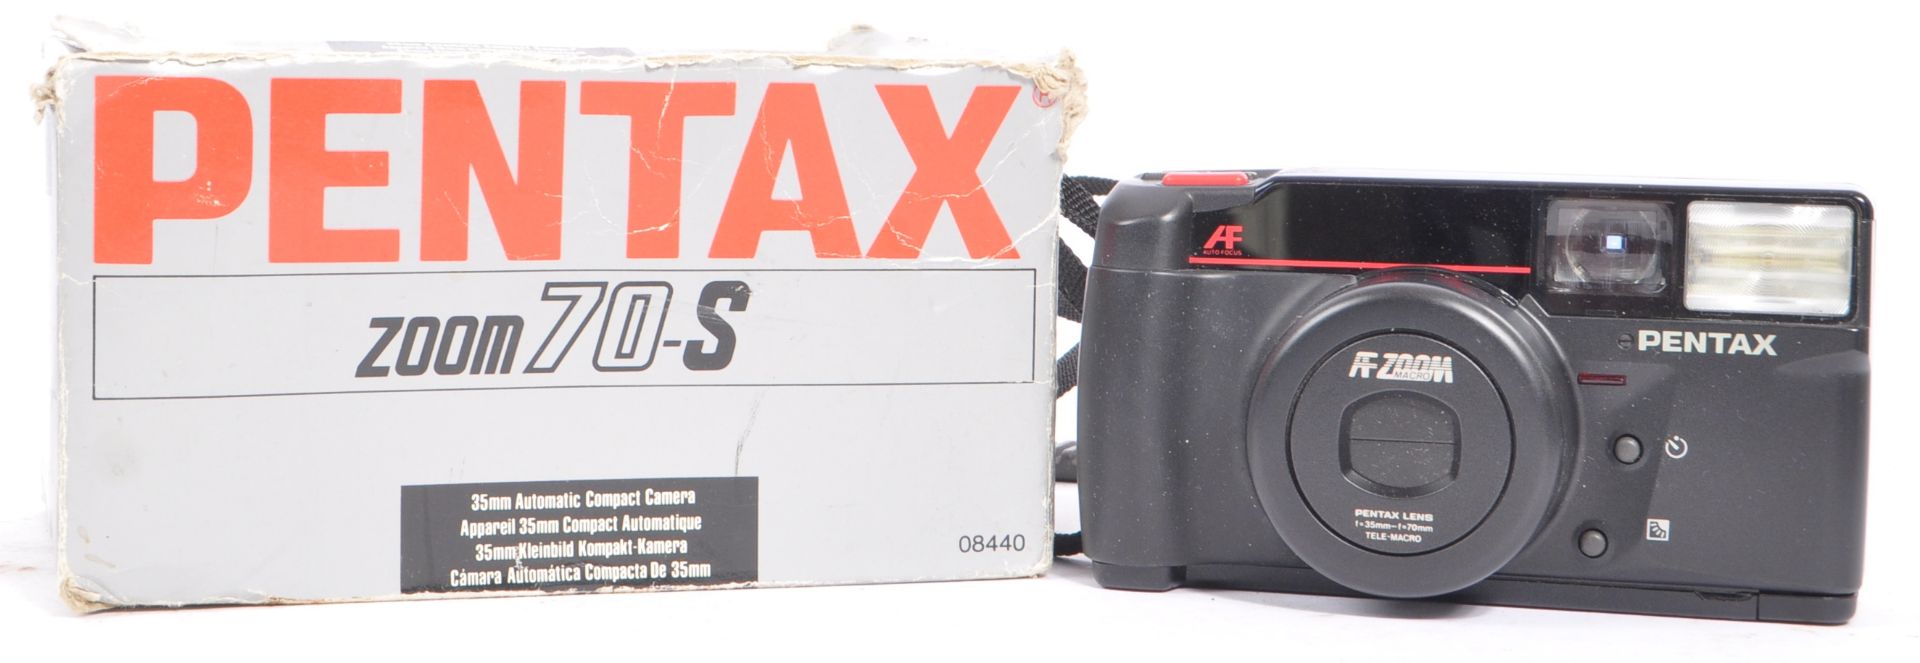 COLLECTION OF LATE 20TH CENTURY PENTAX COMPACT CAMERAS - Image 7 of 7